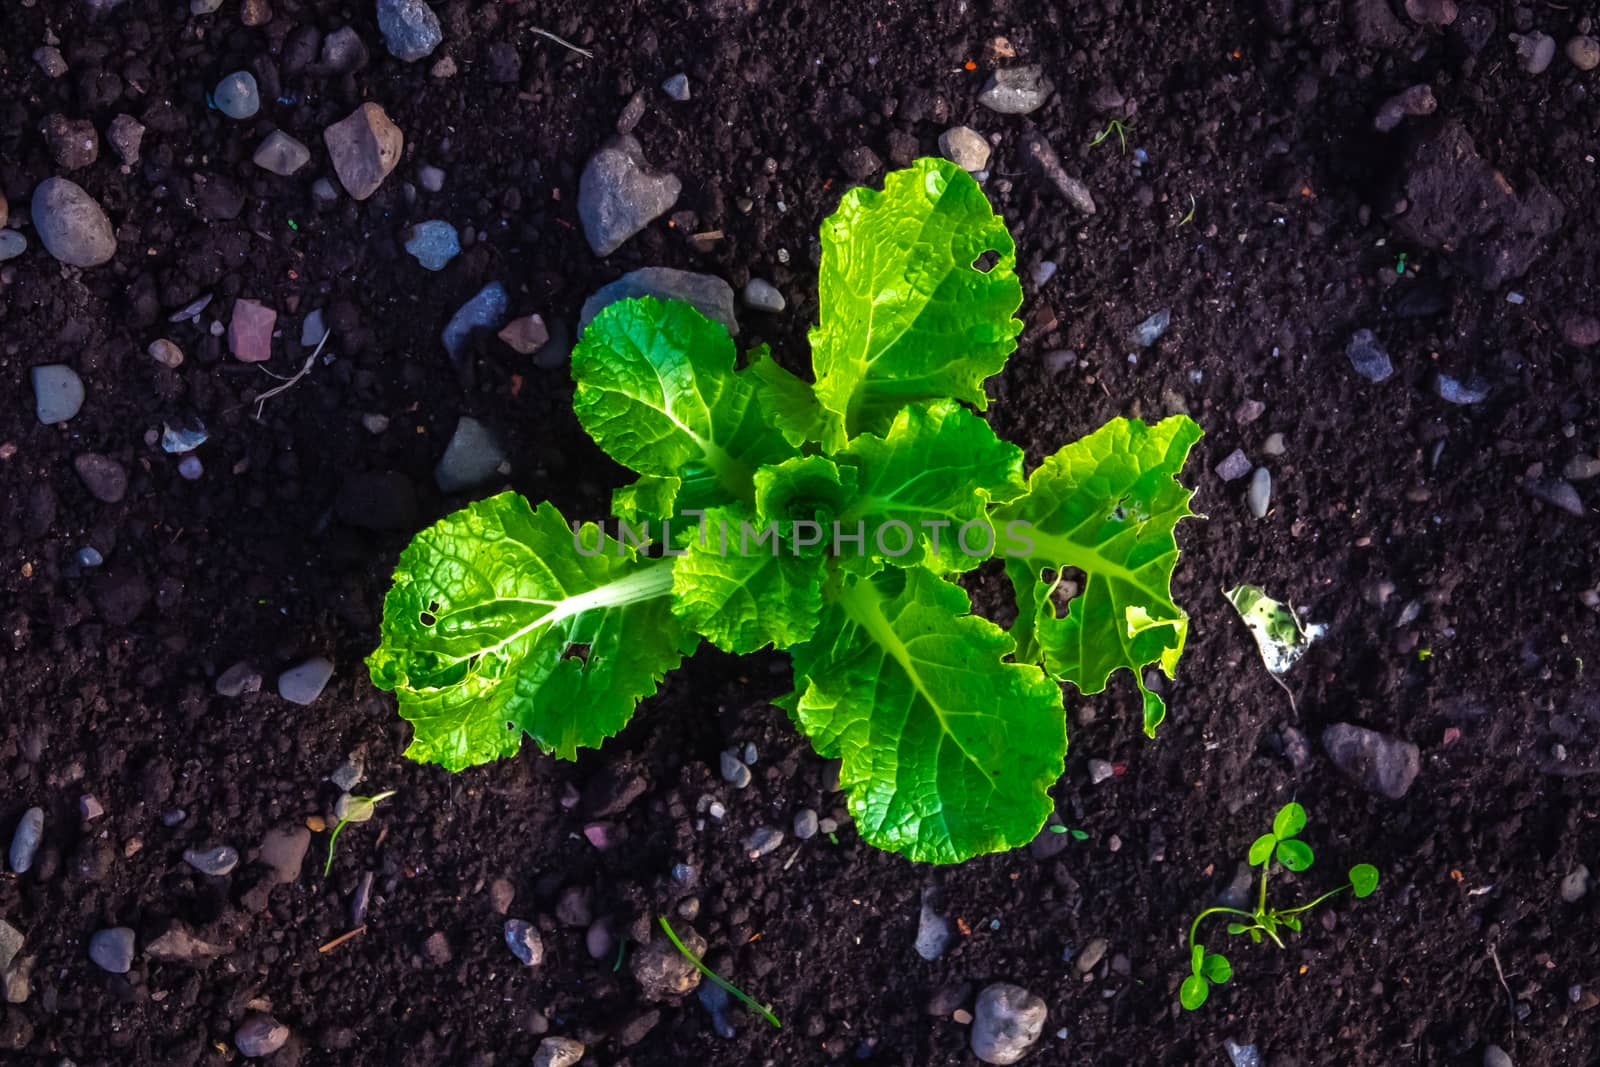 Conceptual Green Shoots Image Of A Young Plant Growing In Fertile Soil